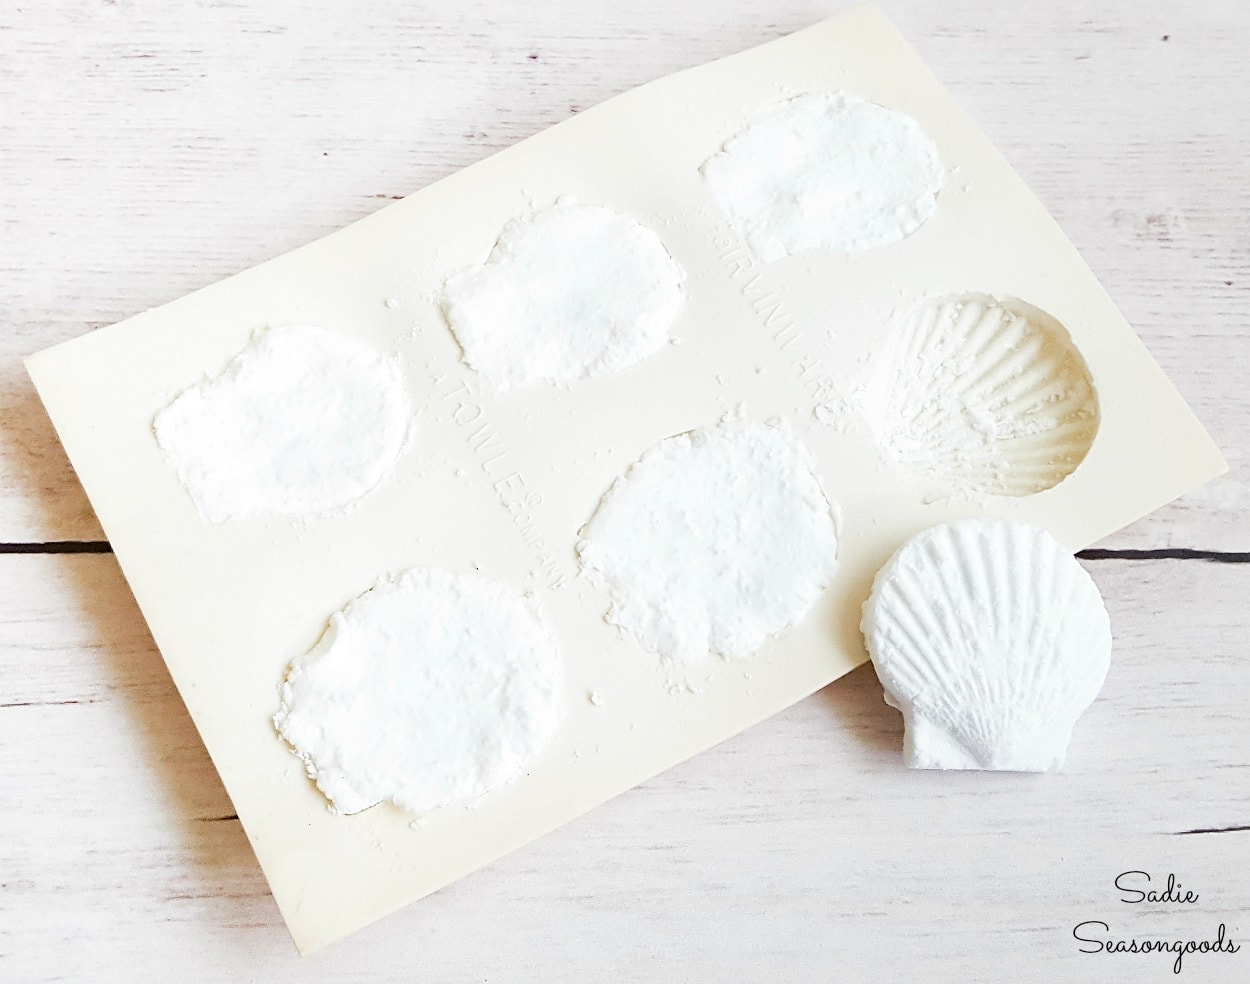 Upcycling the butter molds to make shower melts